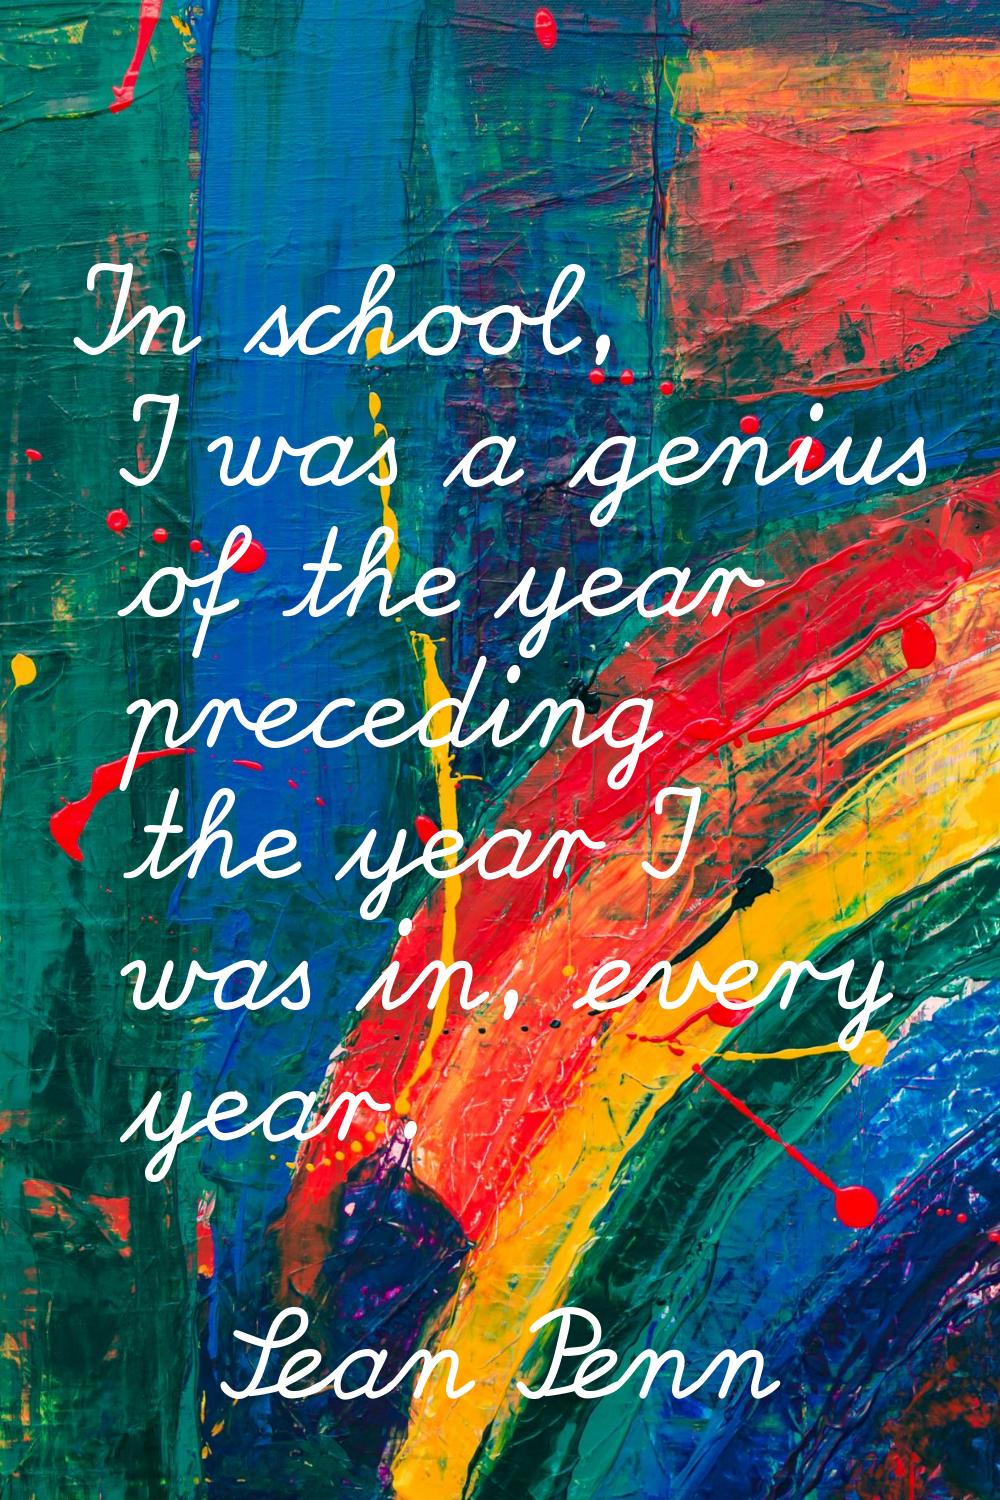 In school, I was a genius of the year preceding the year I was in, every year.